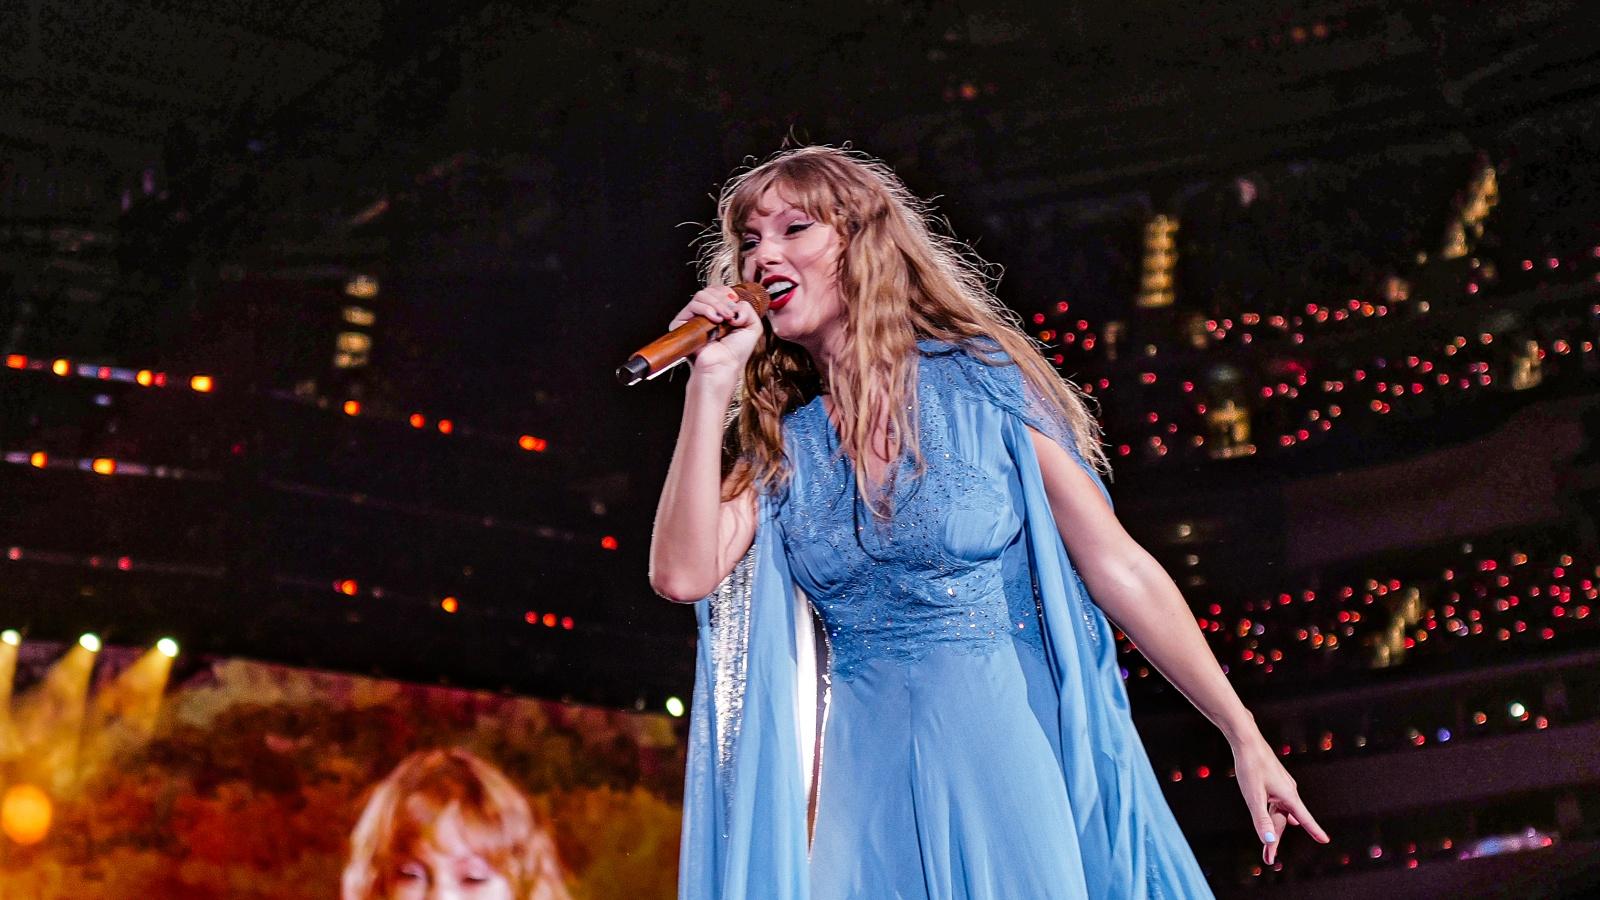 Taylor Swift performing in a sparkling blue dress onstage in a concert